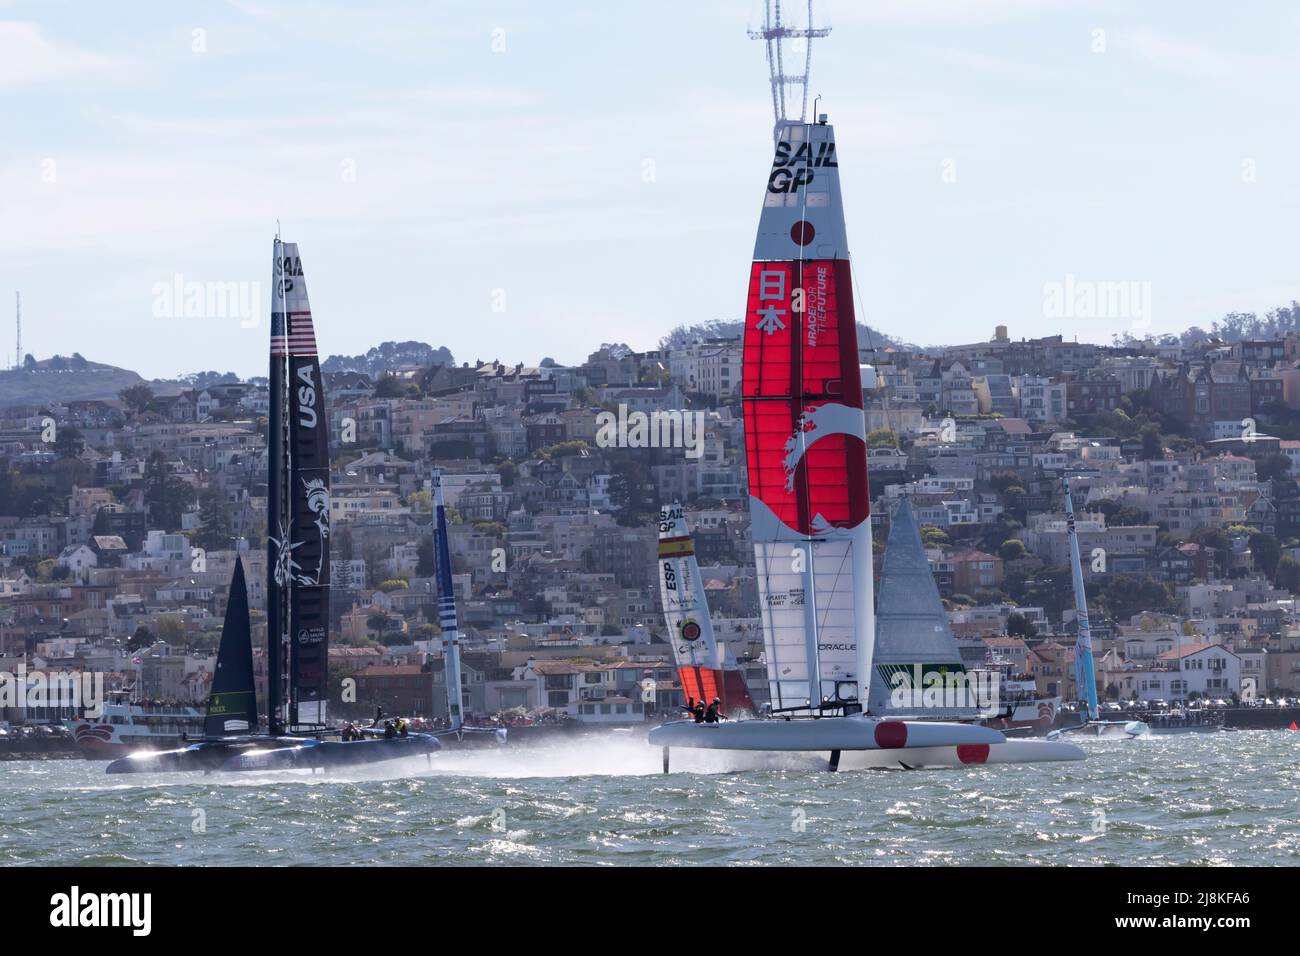 Japan, USA, France, Spain and Great Britian round the buoy during the 2022 SailGP finals racing on San Francisco Bay. Stock Photo